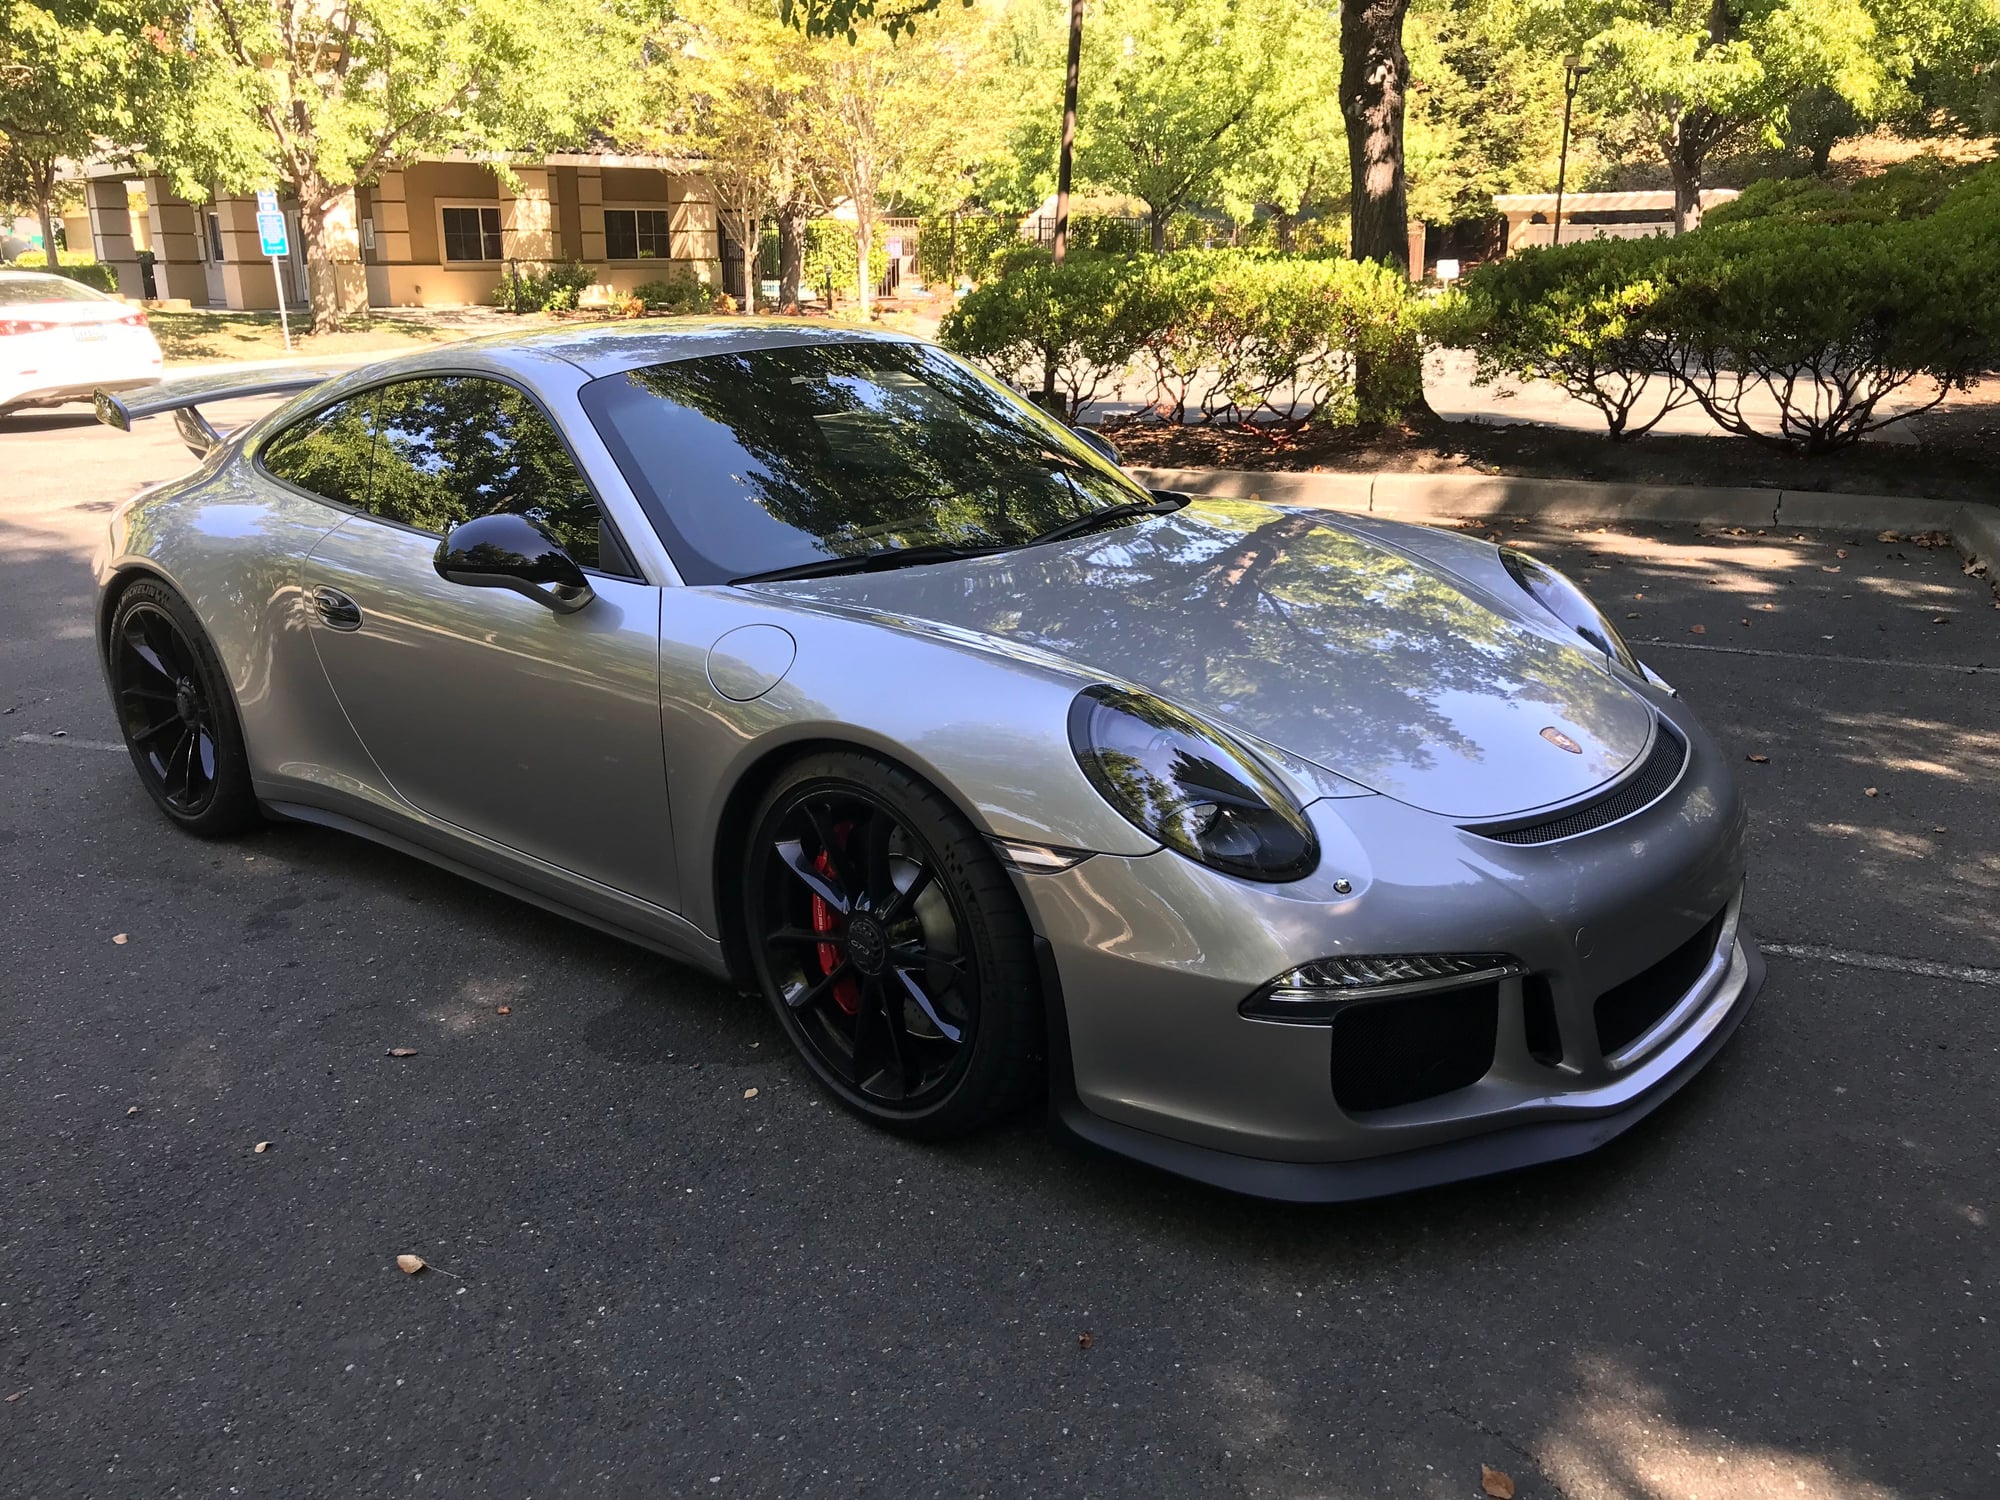 2014 Porsche GT3 - 2014 GT3 with G engine fitted for sale. - Used - VIN WP0AC2A92ES183644 - 39,900 Miles - 6 cyl - 2WD - Automatic - Coupe - Silver - Danville, CA 94526, United States